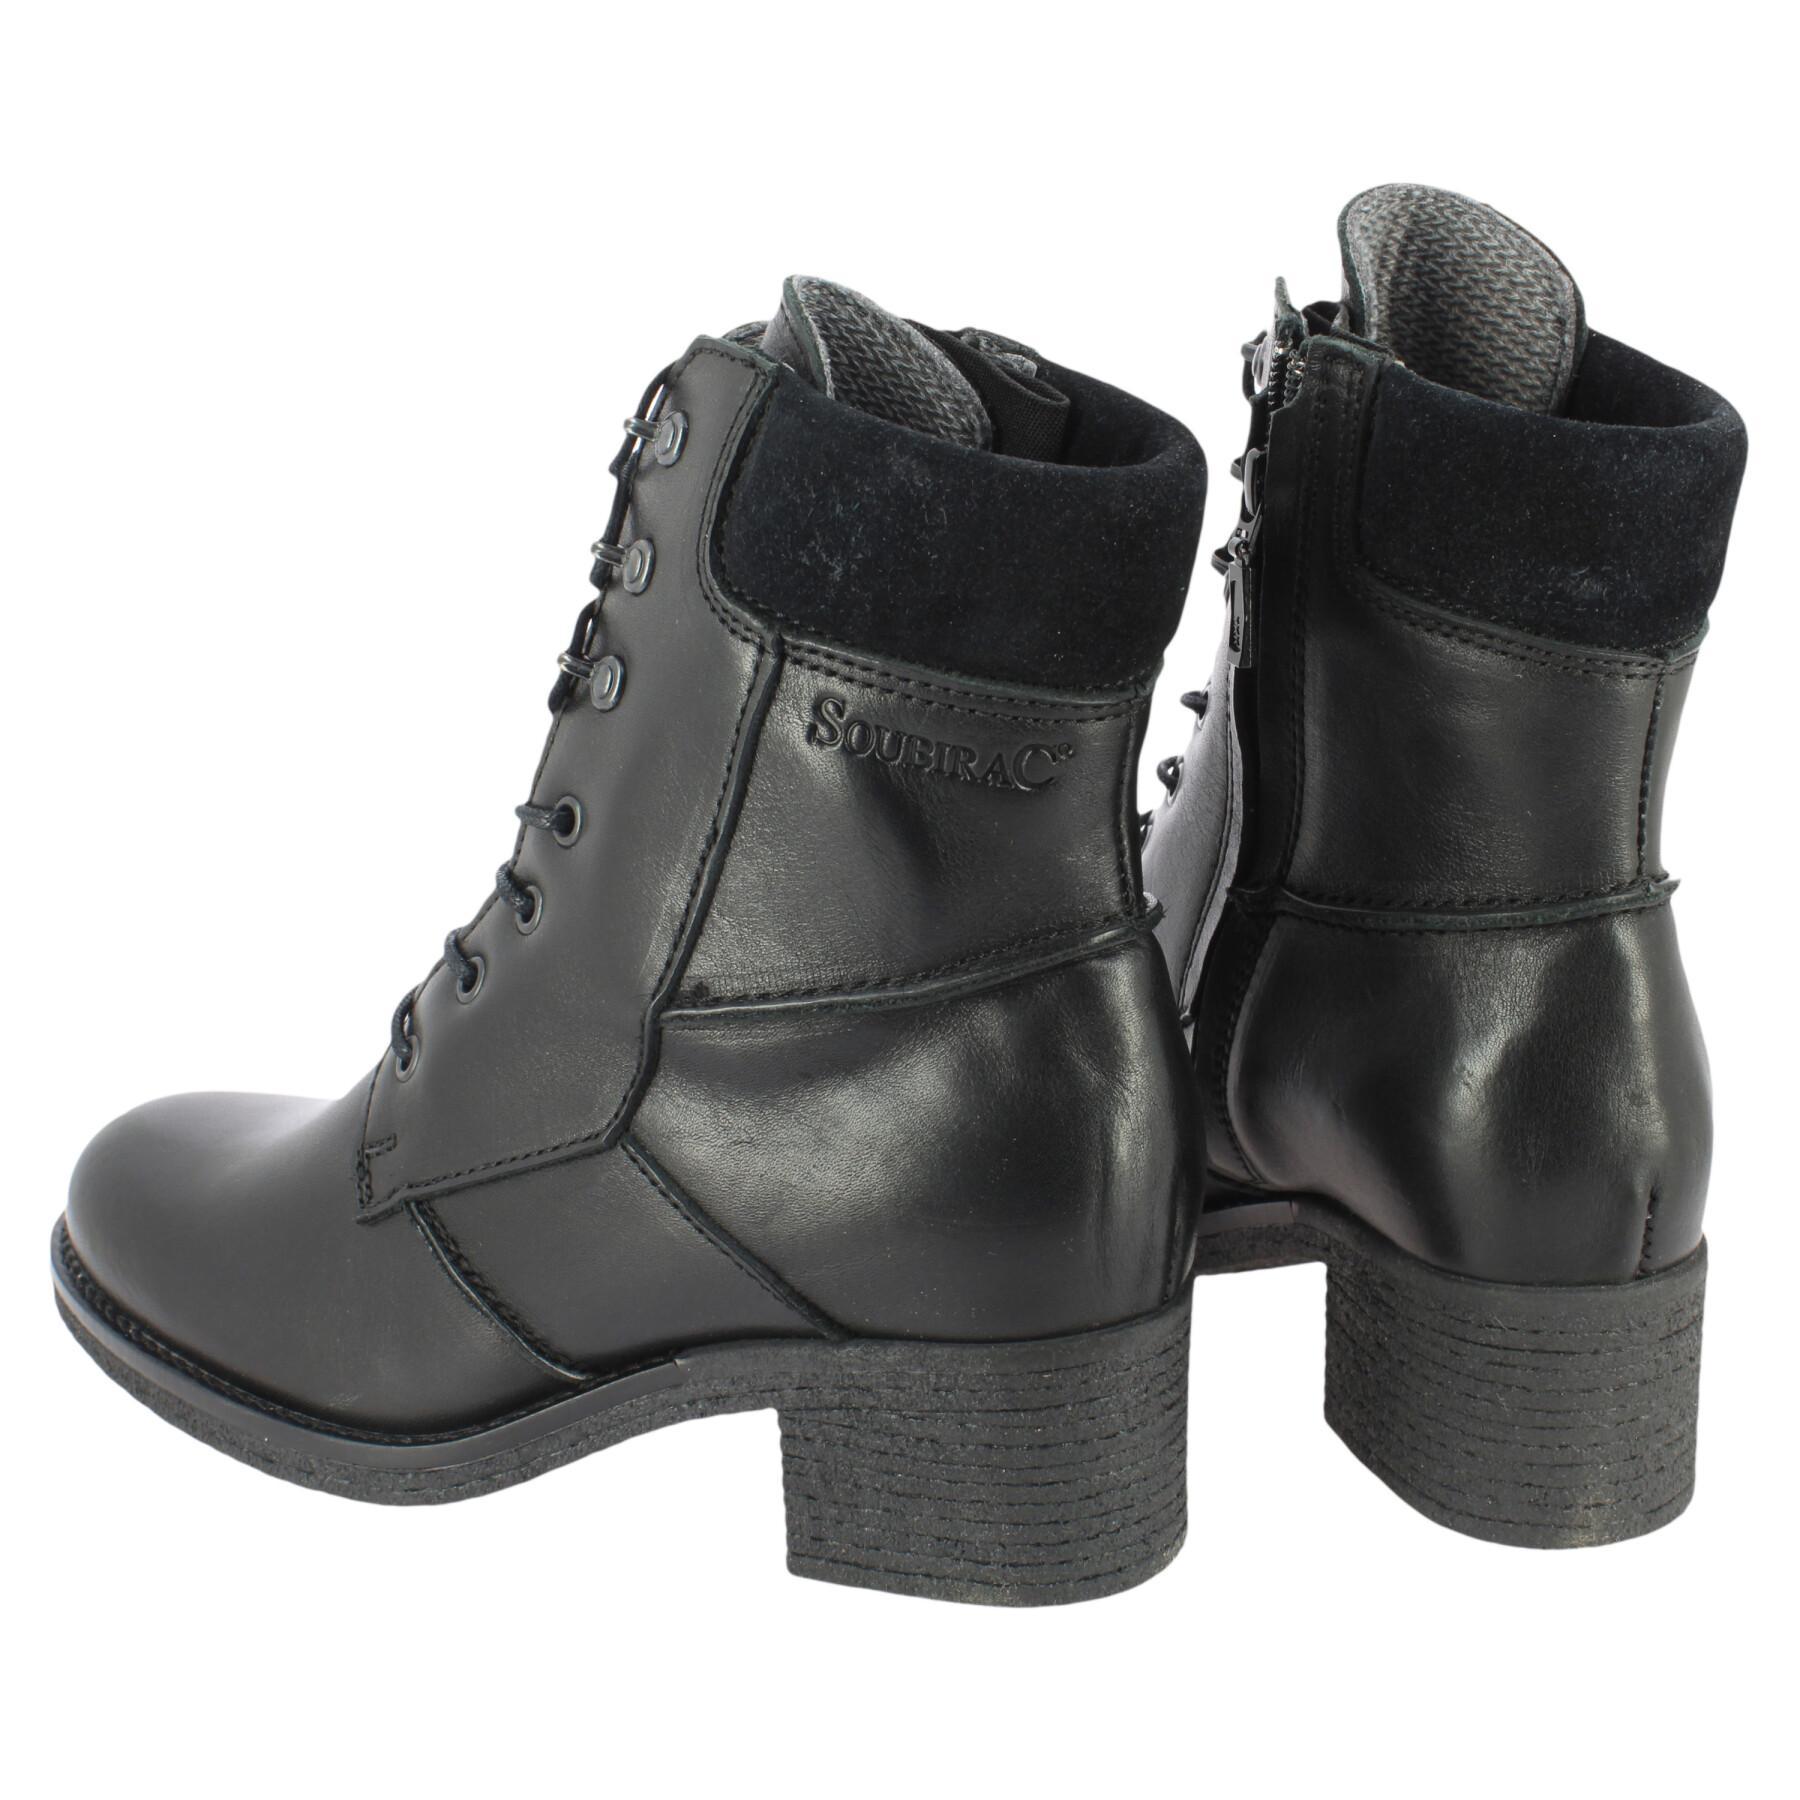 Motorcycle boots woman Soubirac terry